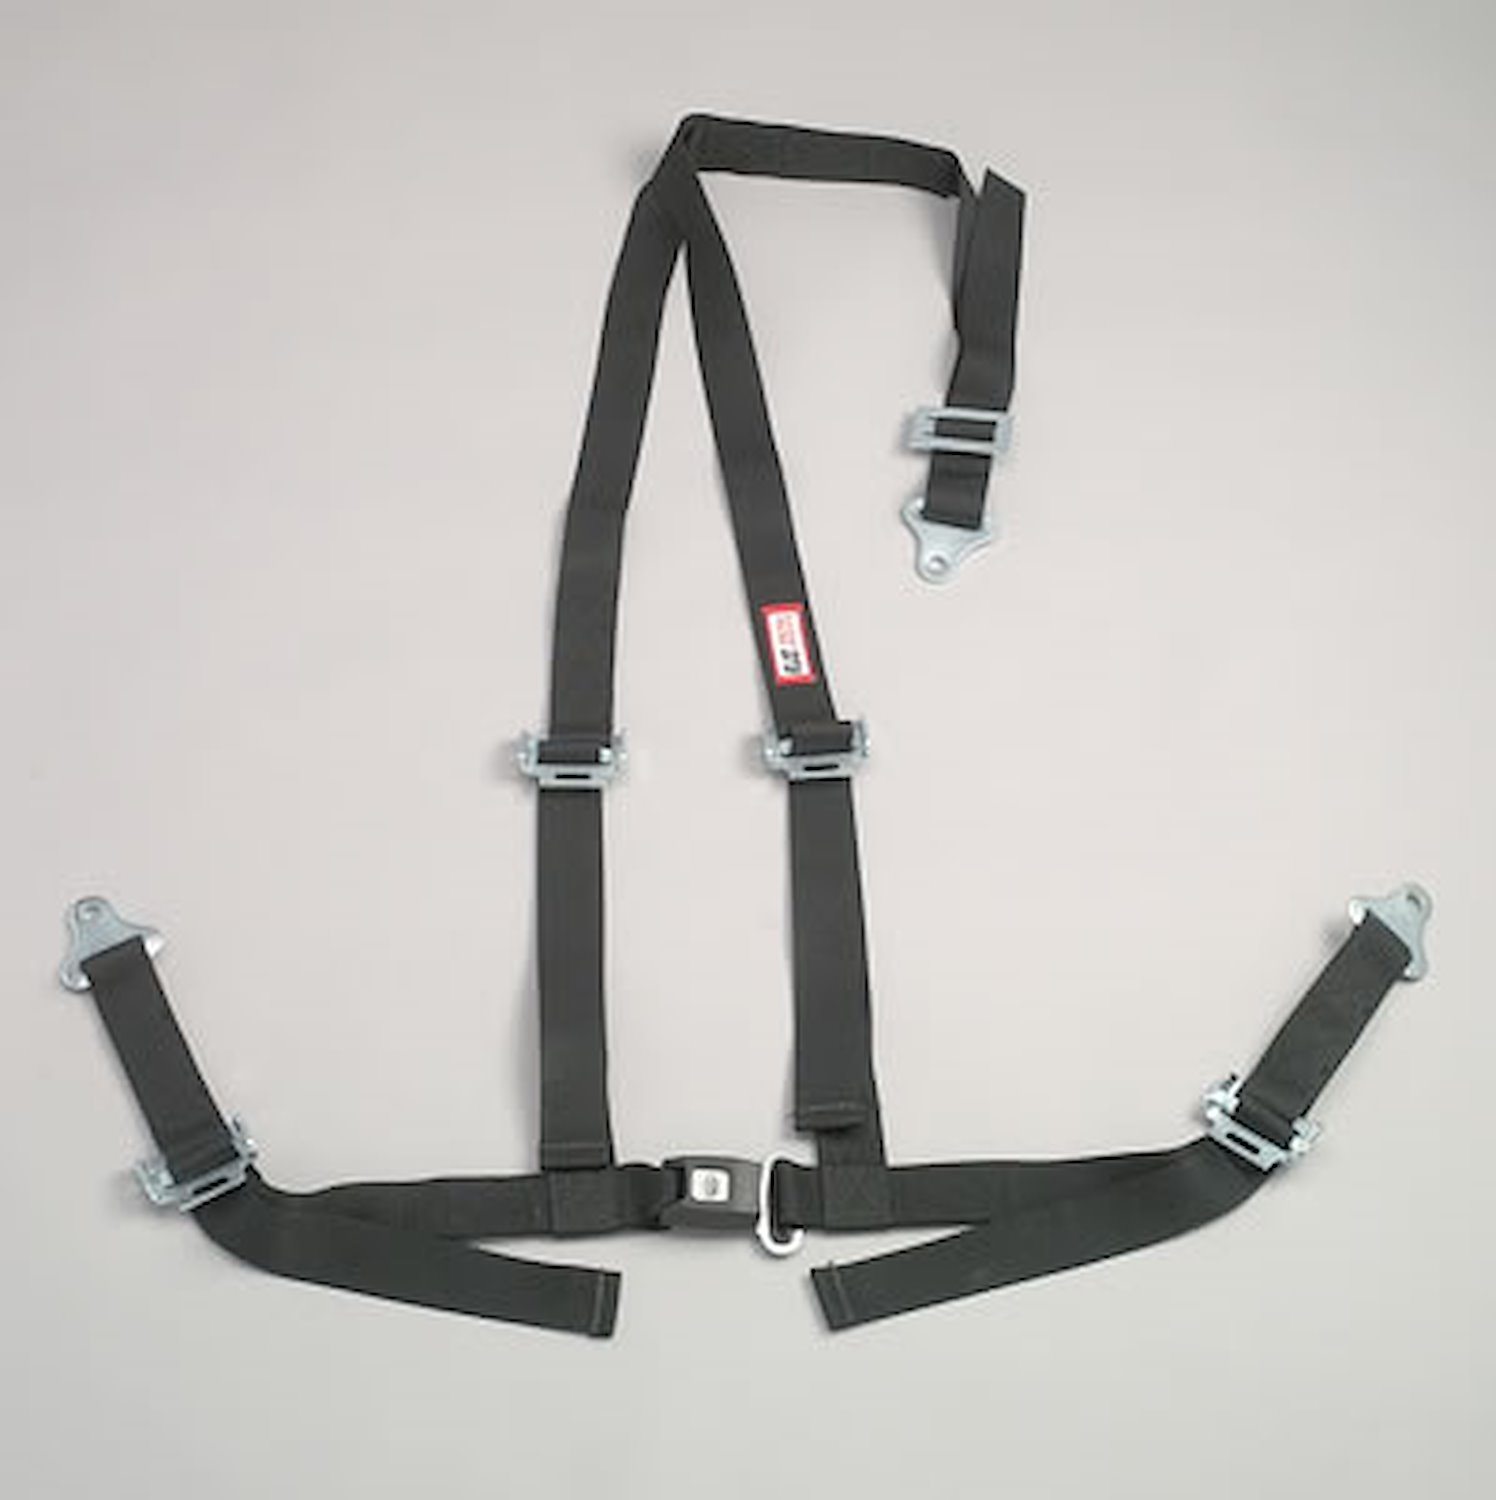 NON-SFI B&T HARNESS 2 PULL UP Lap Belt SNAP 2 S.H. INDIVIDUAL FLOOR Mount WRAP/BOLT RED